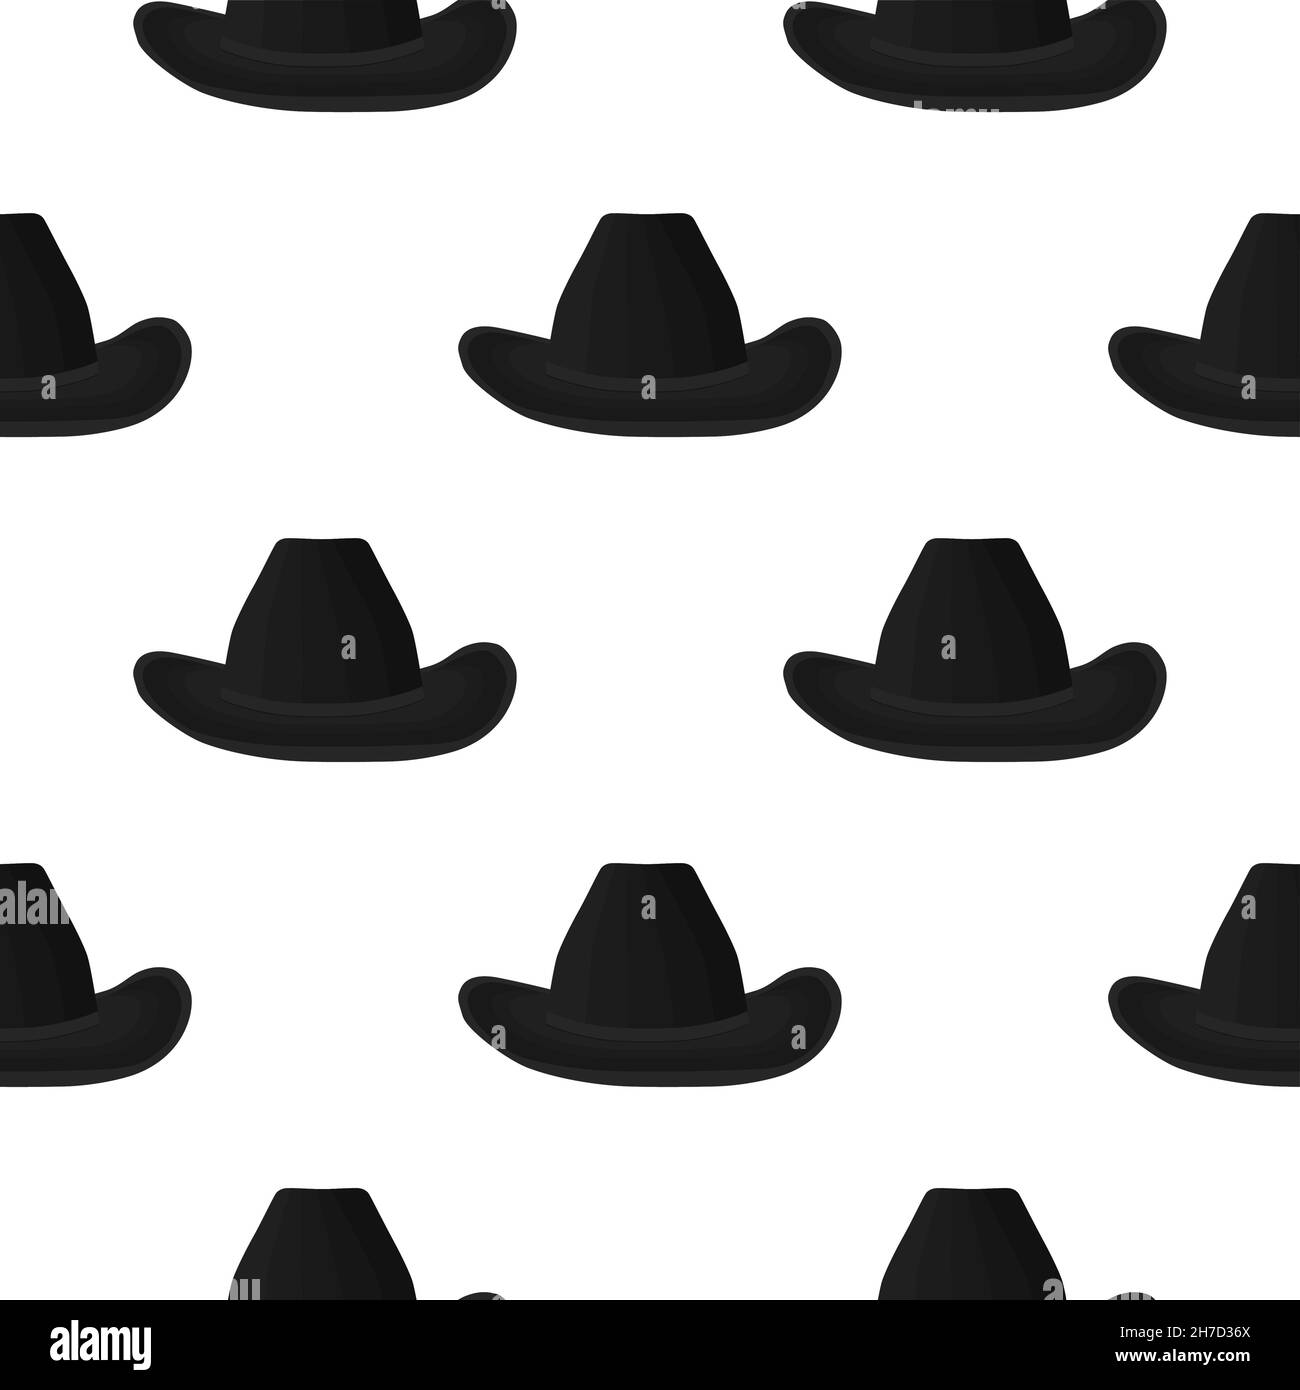 Illustration on theme colored pattern hats cowboy, beautiful caps in white background. Caps pattern consisting of collection hats cowboy for wearing. Stock Vector